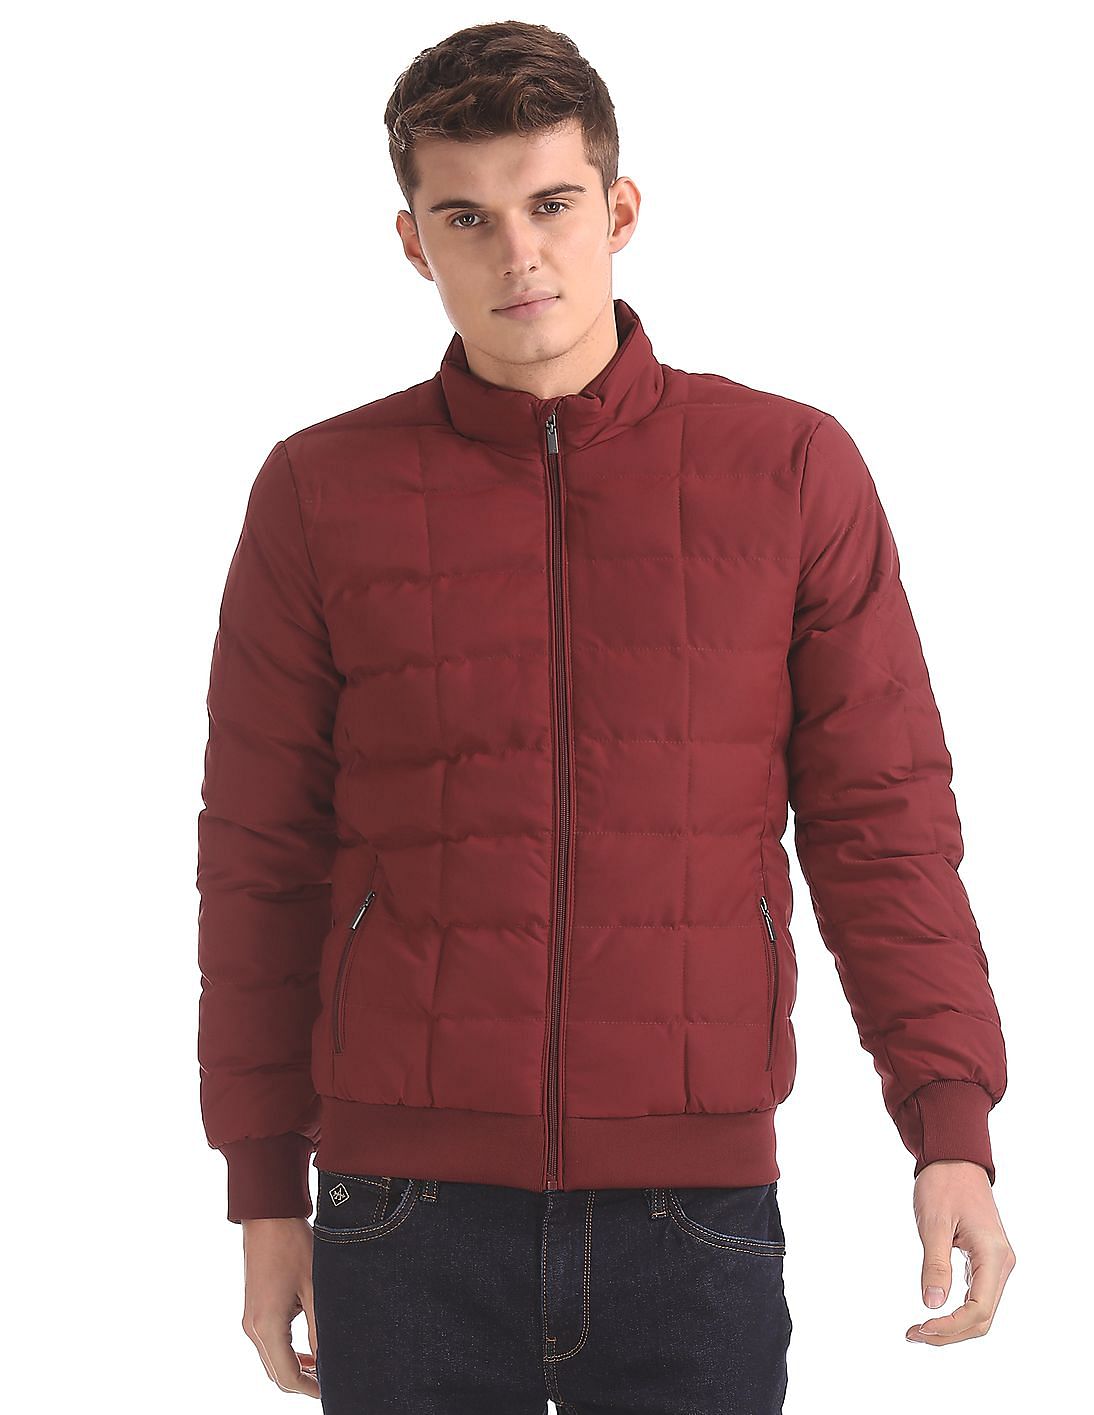 Buy Arrow Sports Quilted Padded Jacket - NNNOW.com